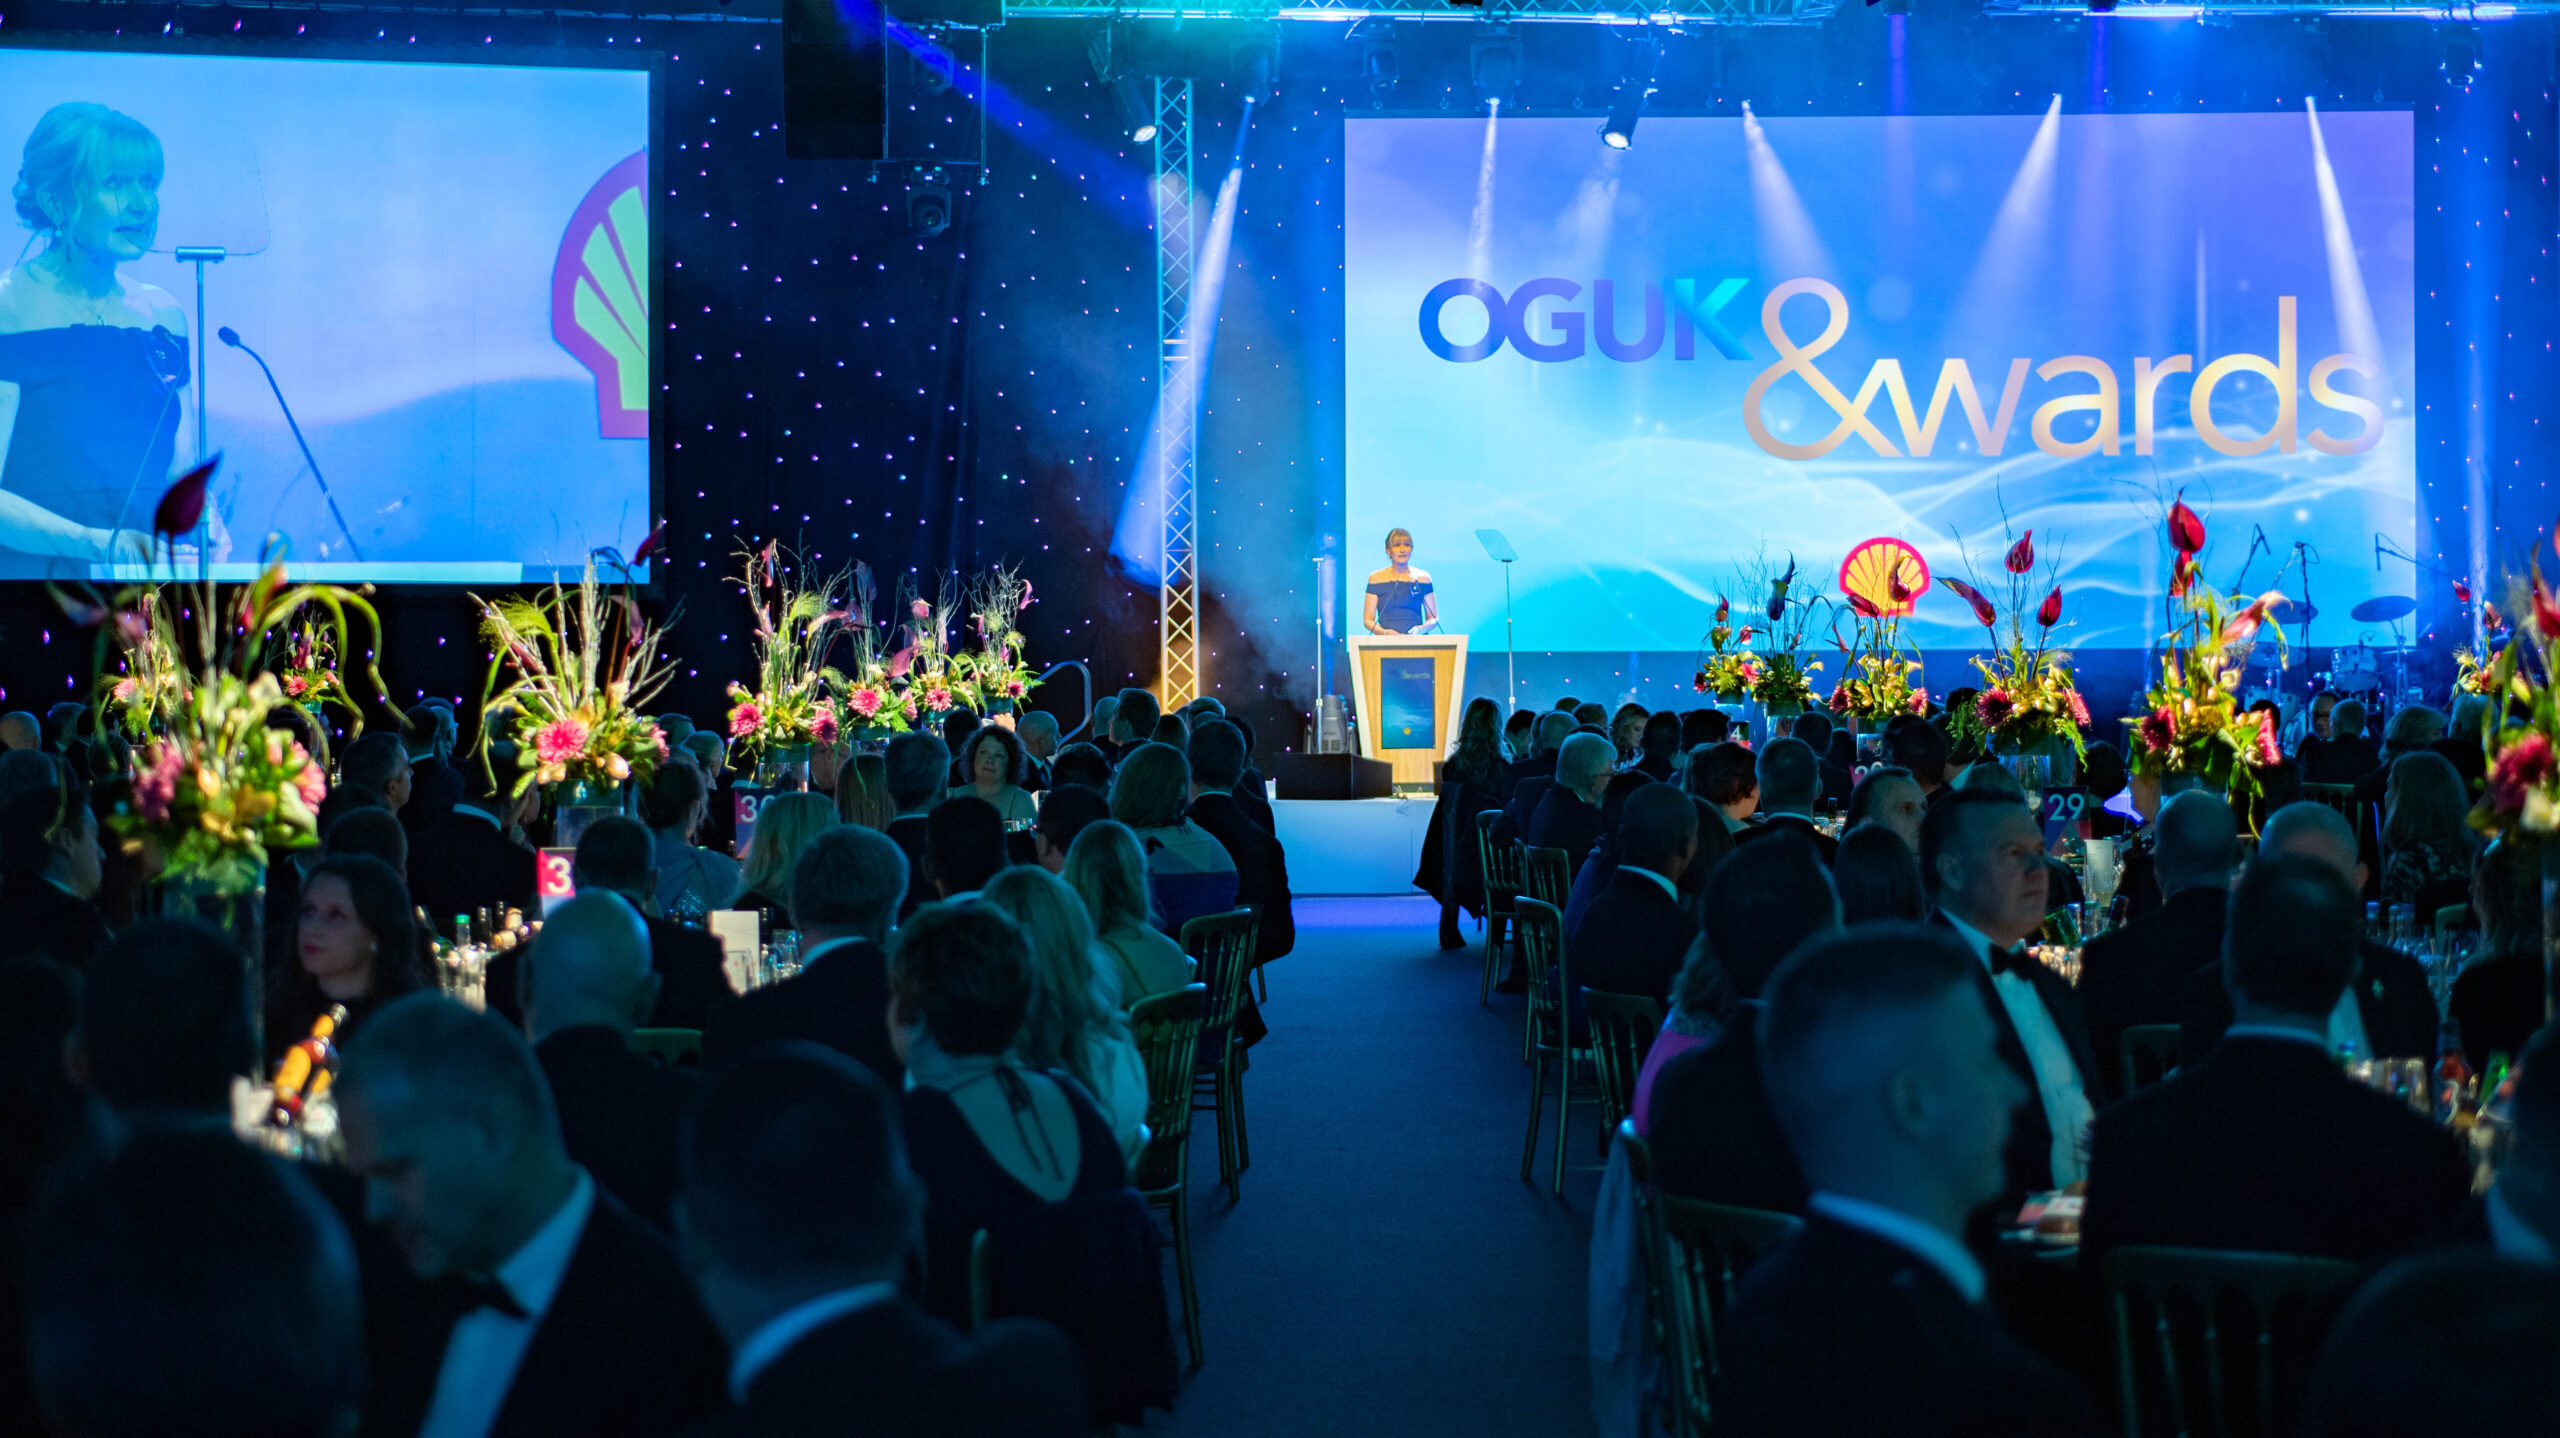 OEUK Awards 2022 - Save the Date